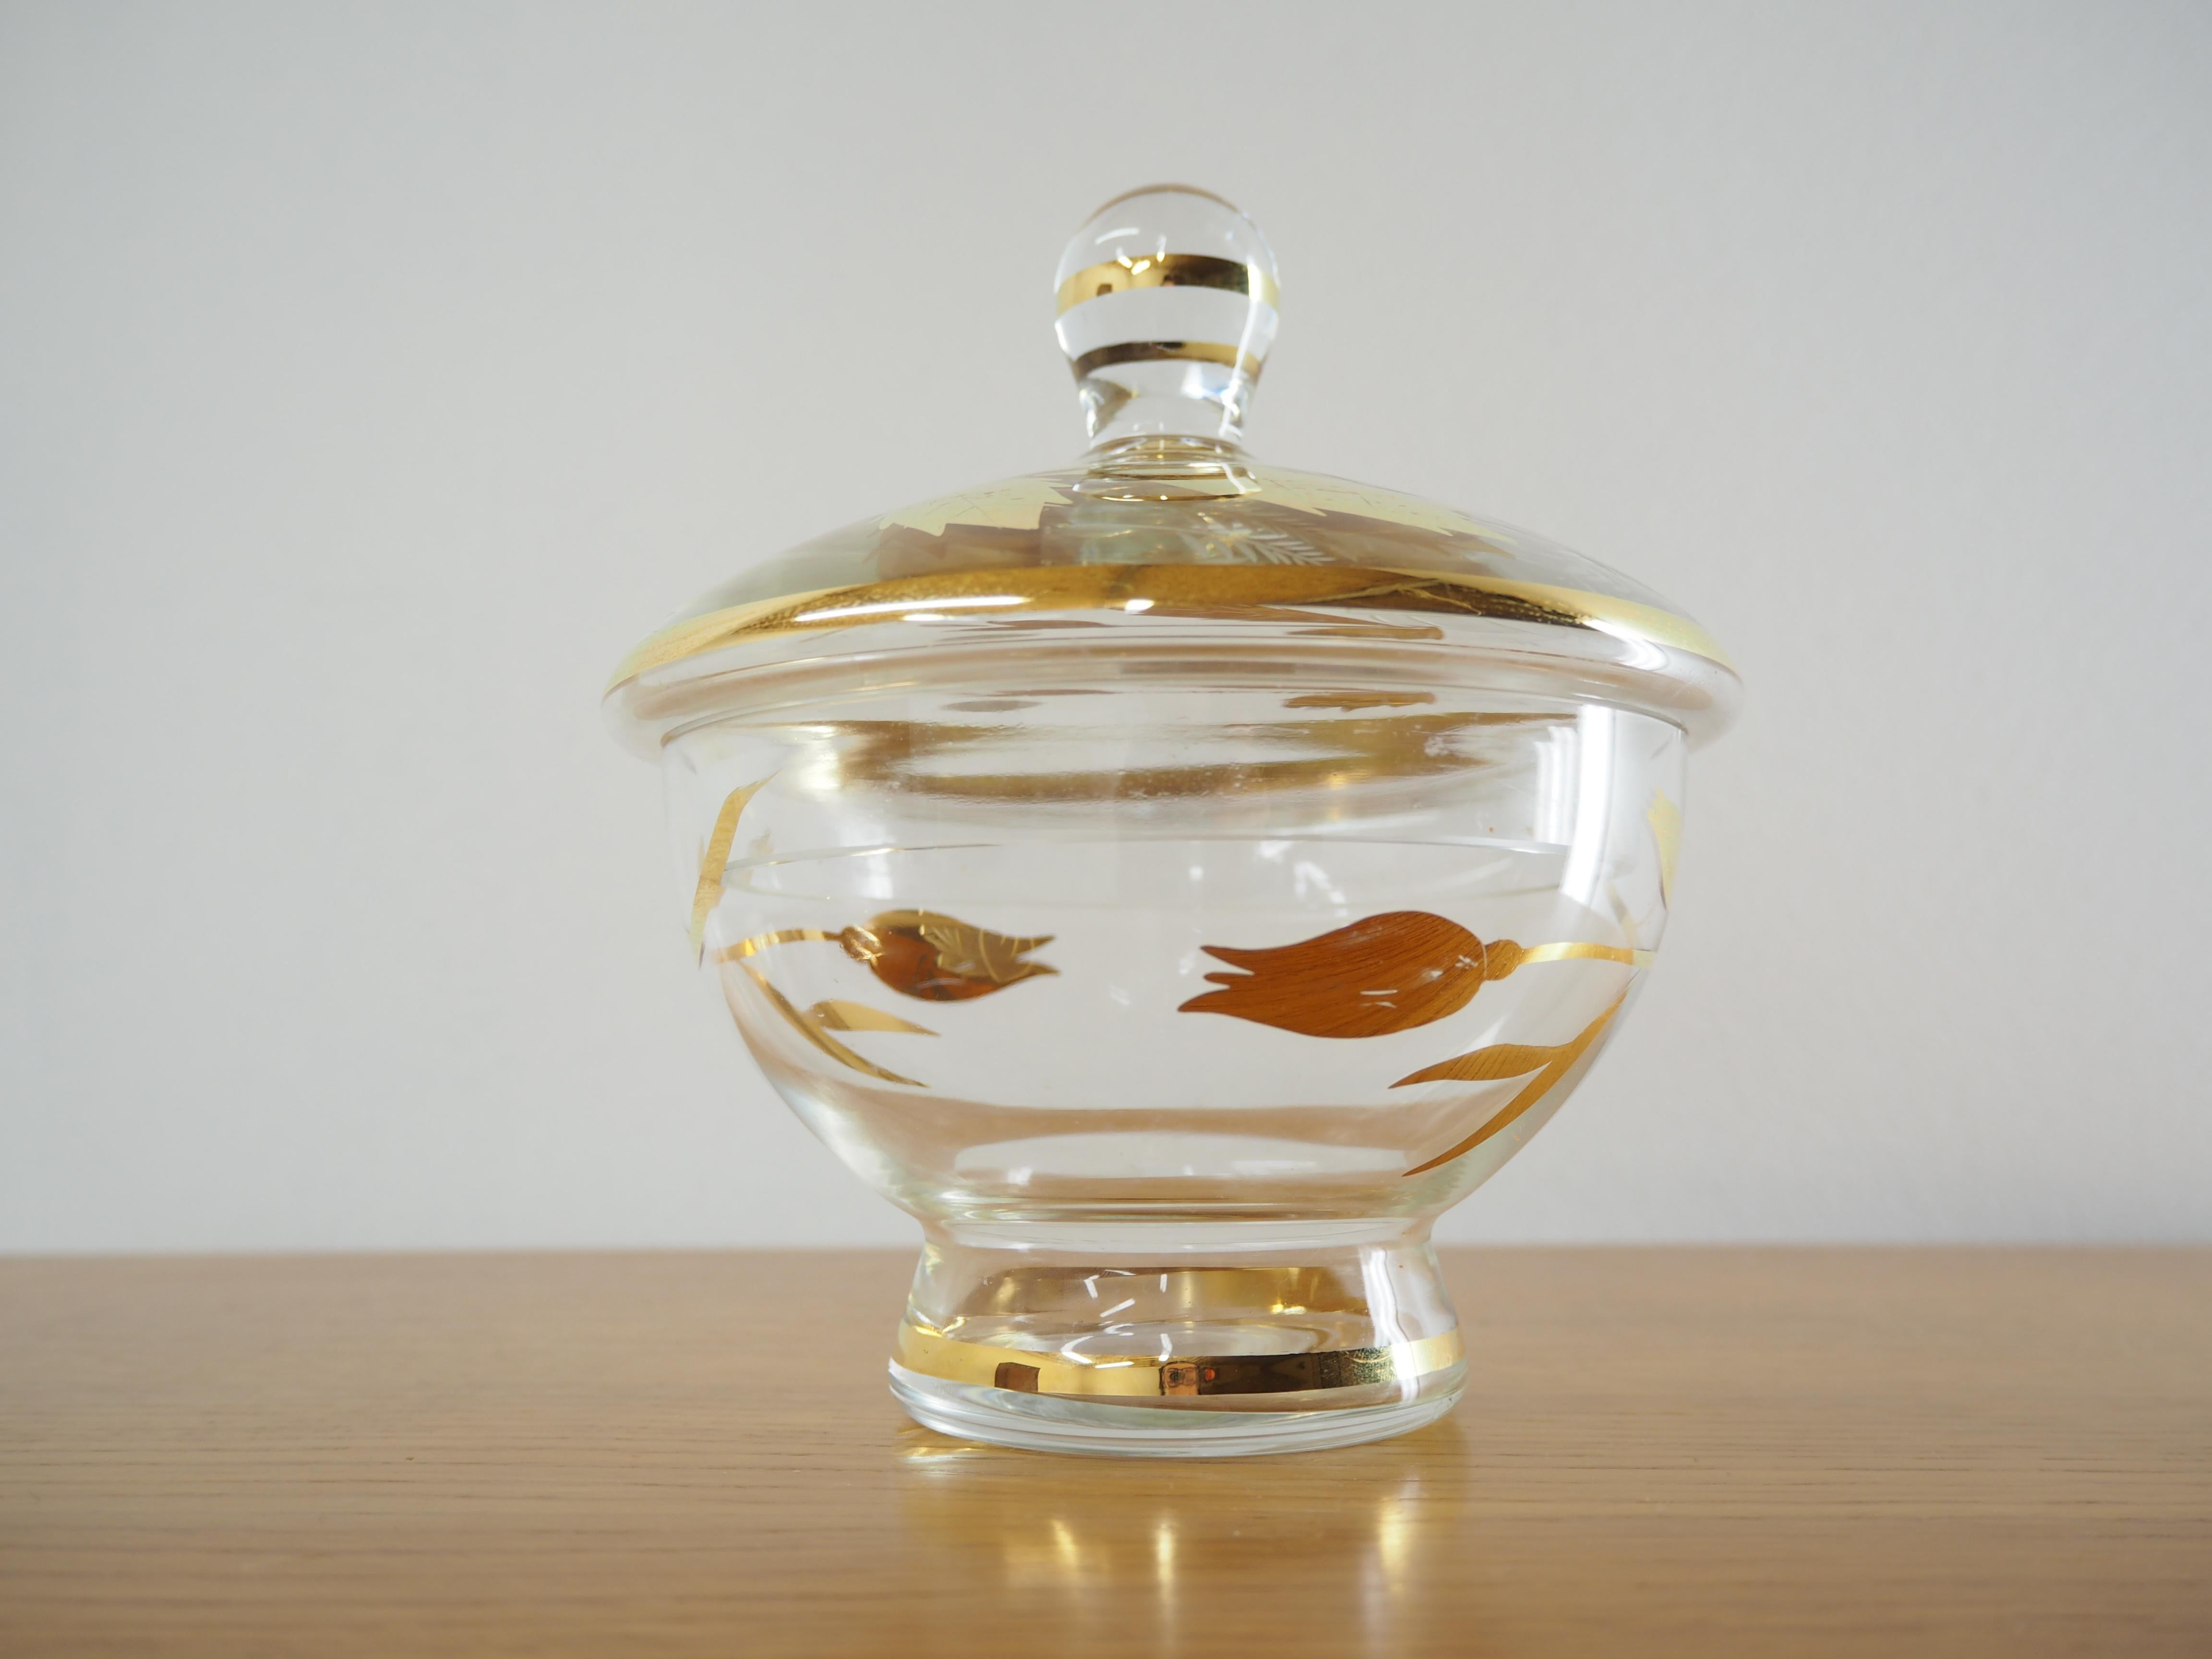 Midcentury all glass sugar bowl by Bohemia Crystal Czechoslovakia, 1950s. In perfect original condition.